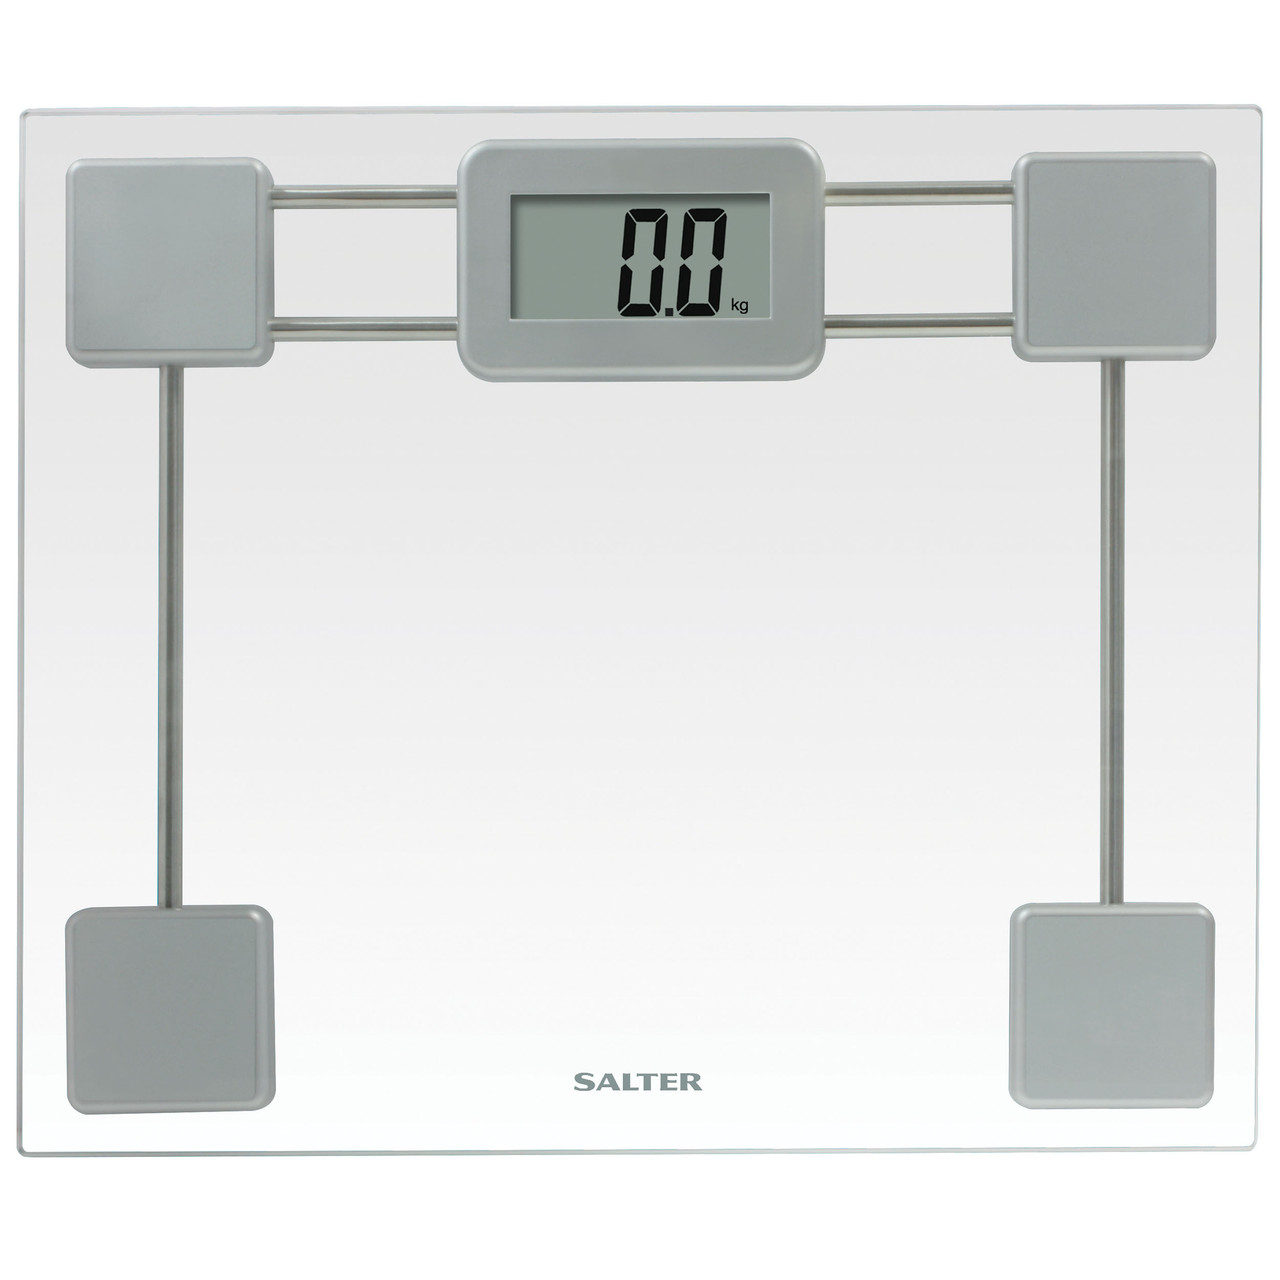 Toughened Glass Compact Electronic Bathroom Scale, 150kg Capacity